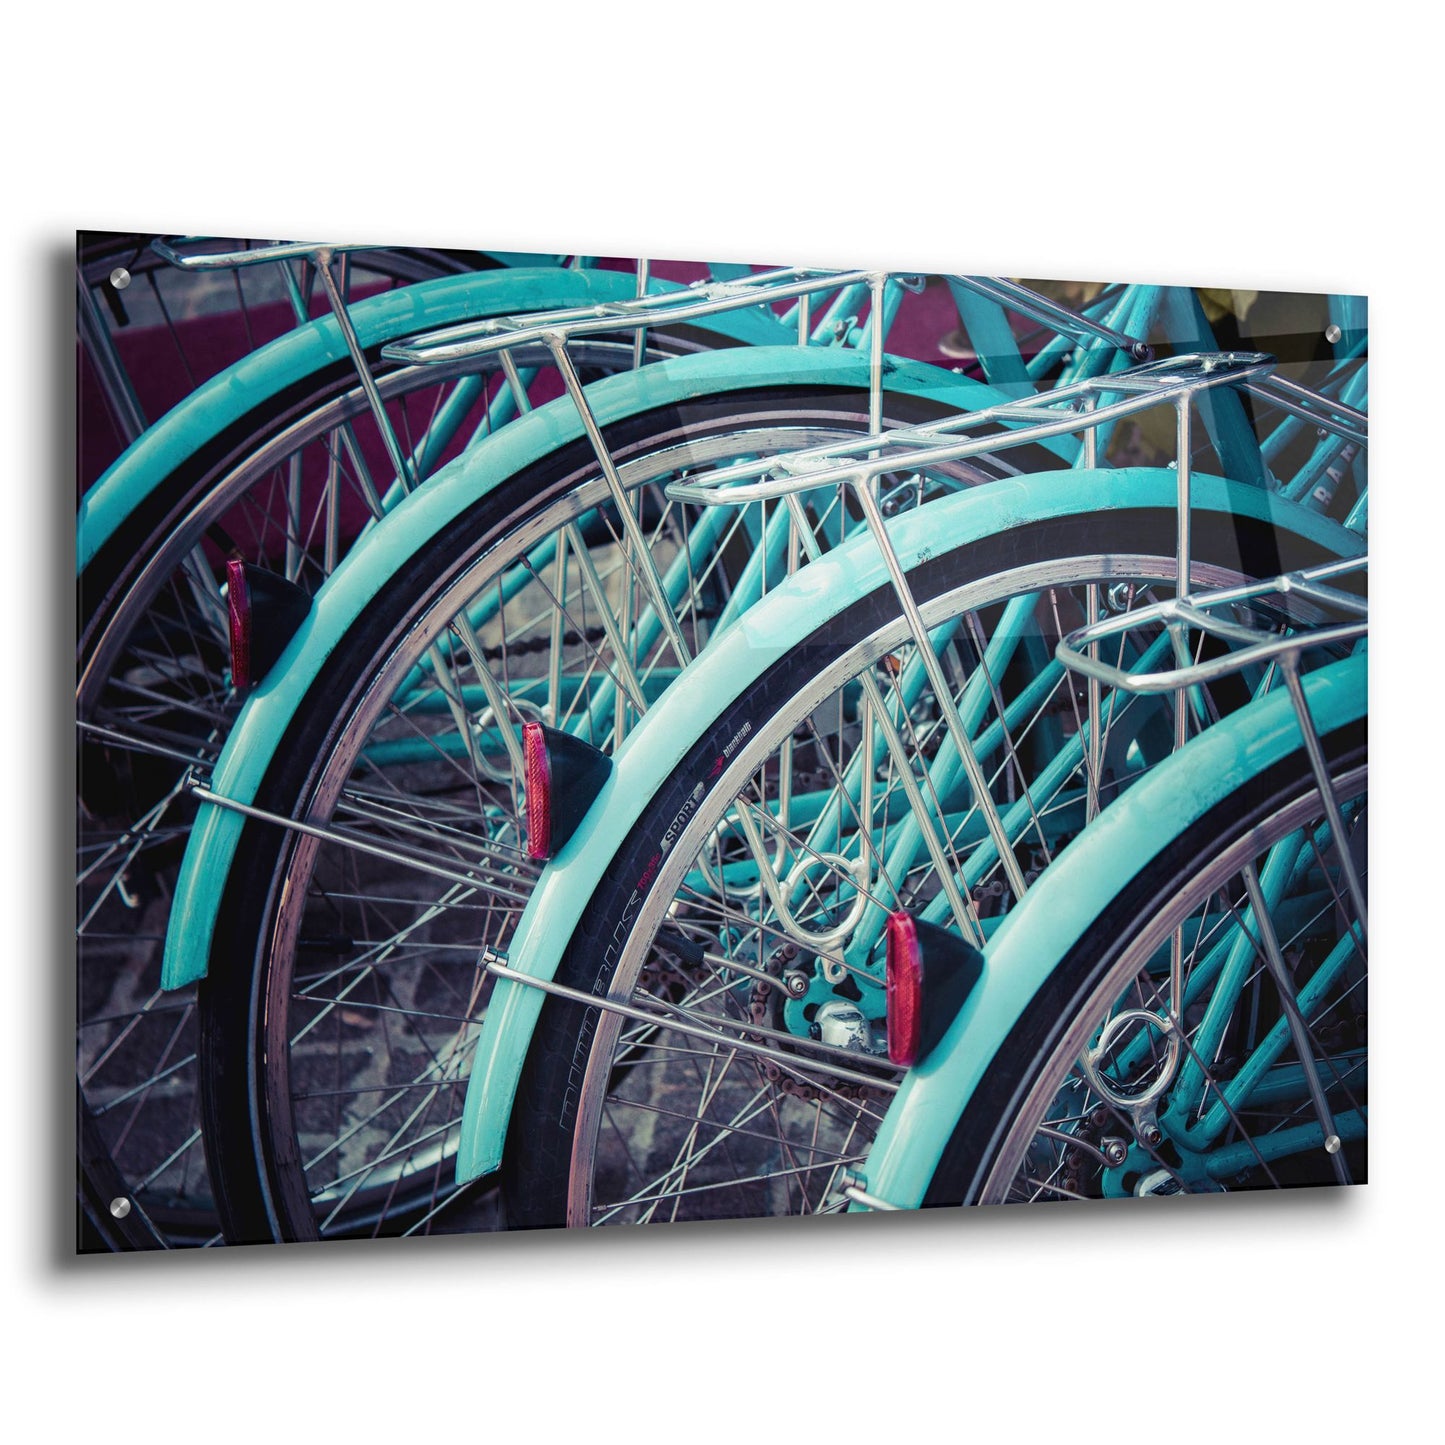 Epic Art ' Bicycle Line Up 2' by Jessica Reiss, Acrylic Glass Wall Art,36x24